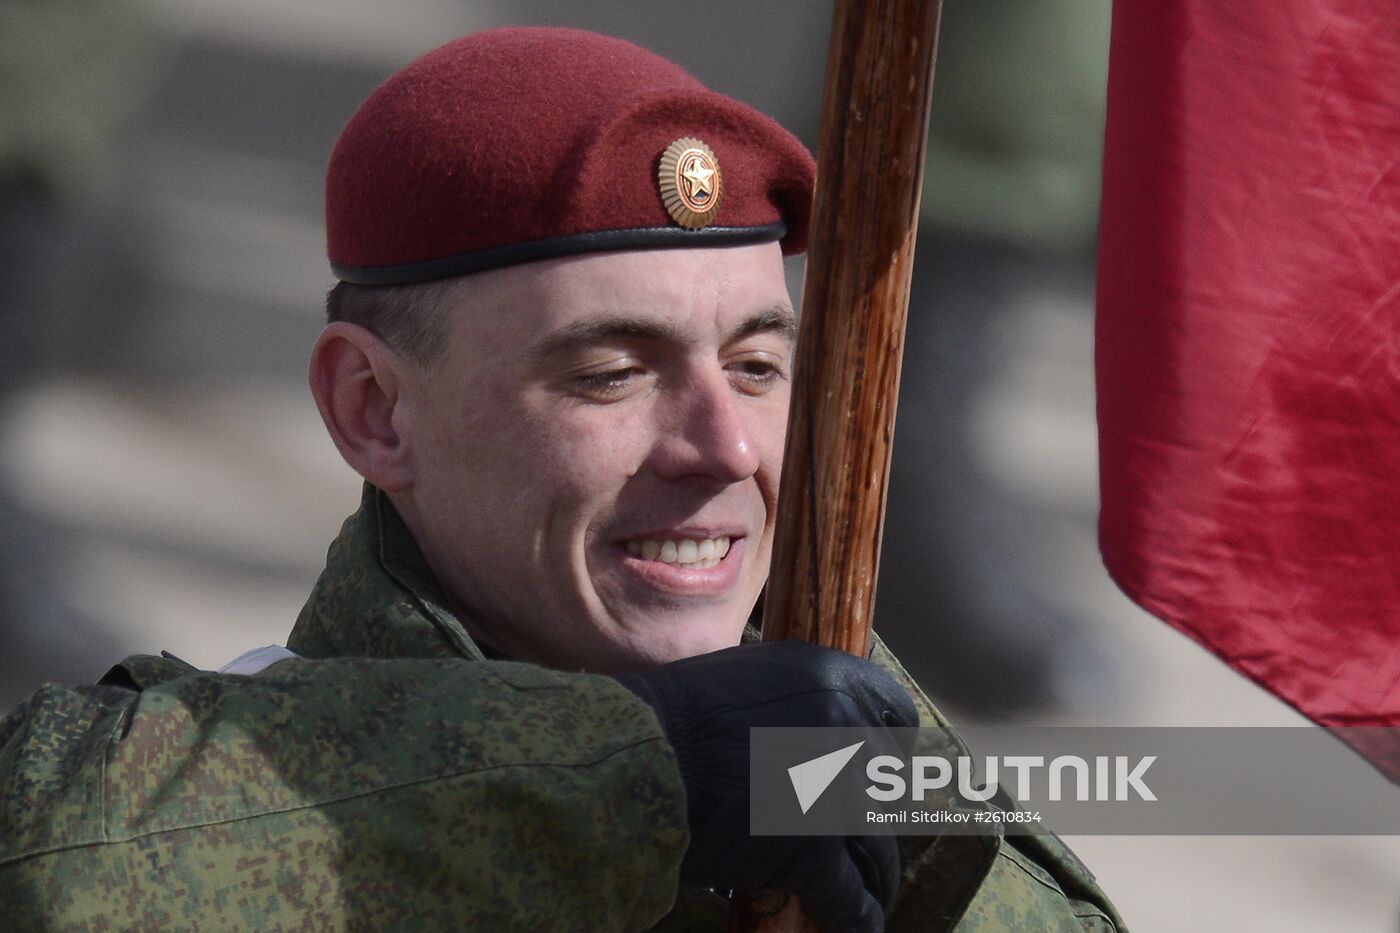 Joint training of foot and mechanized units for Victory Parade